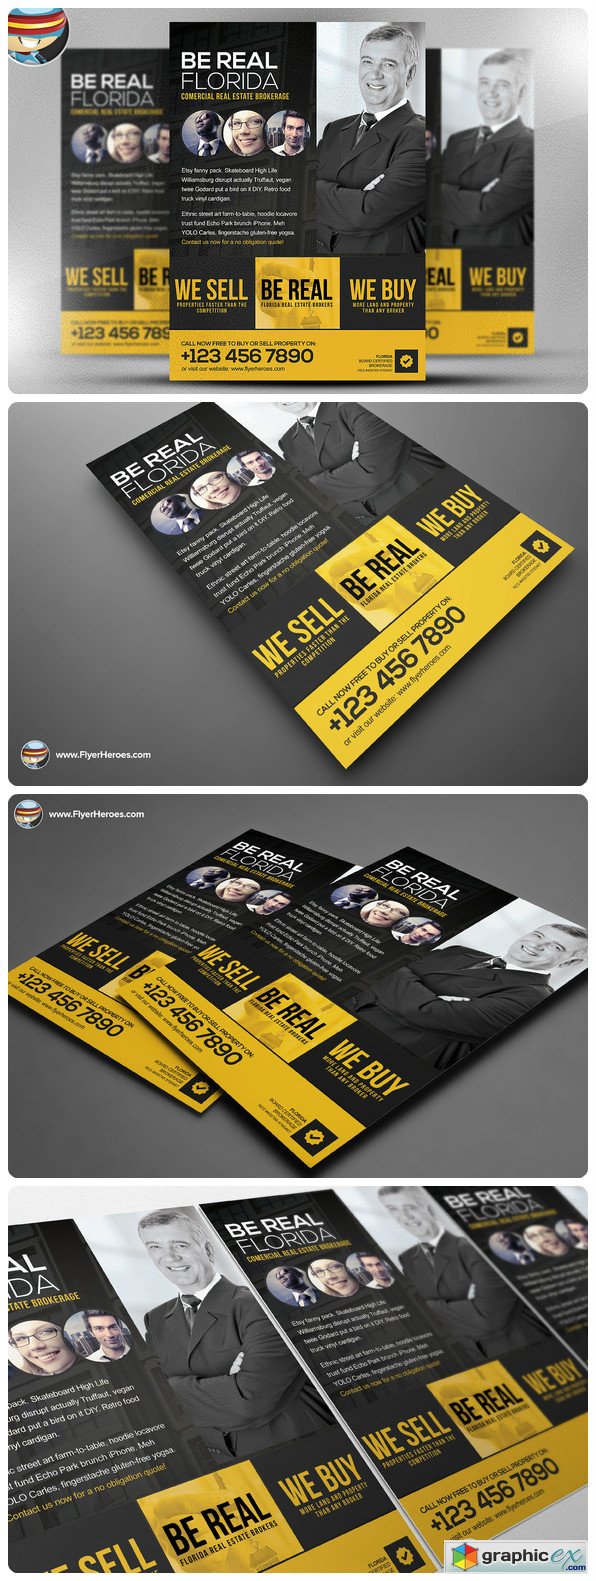  BeReal Flyer Template